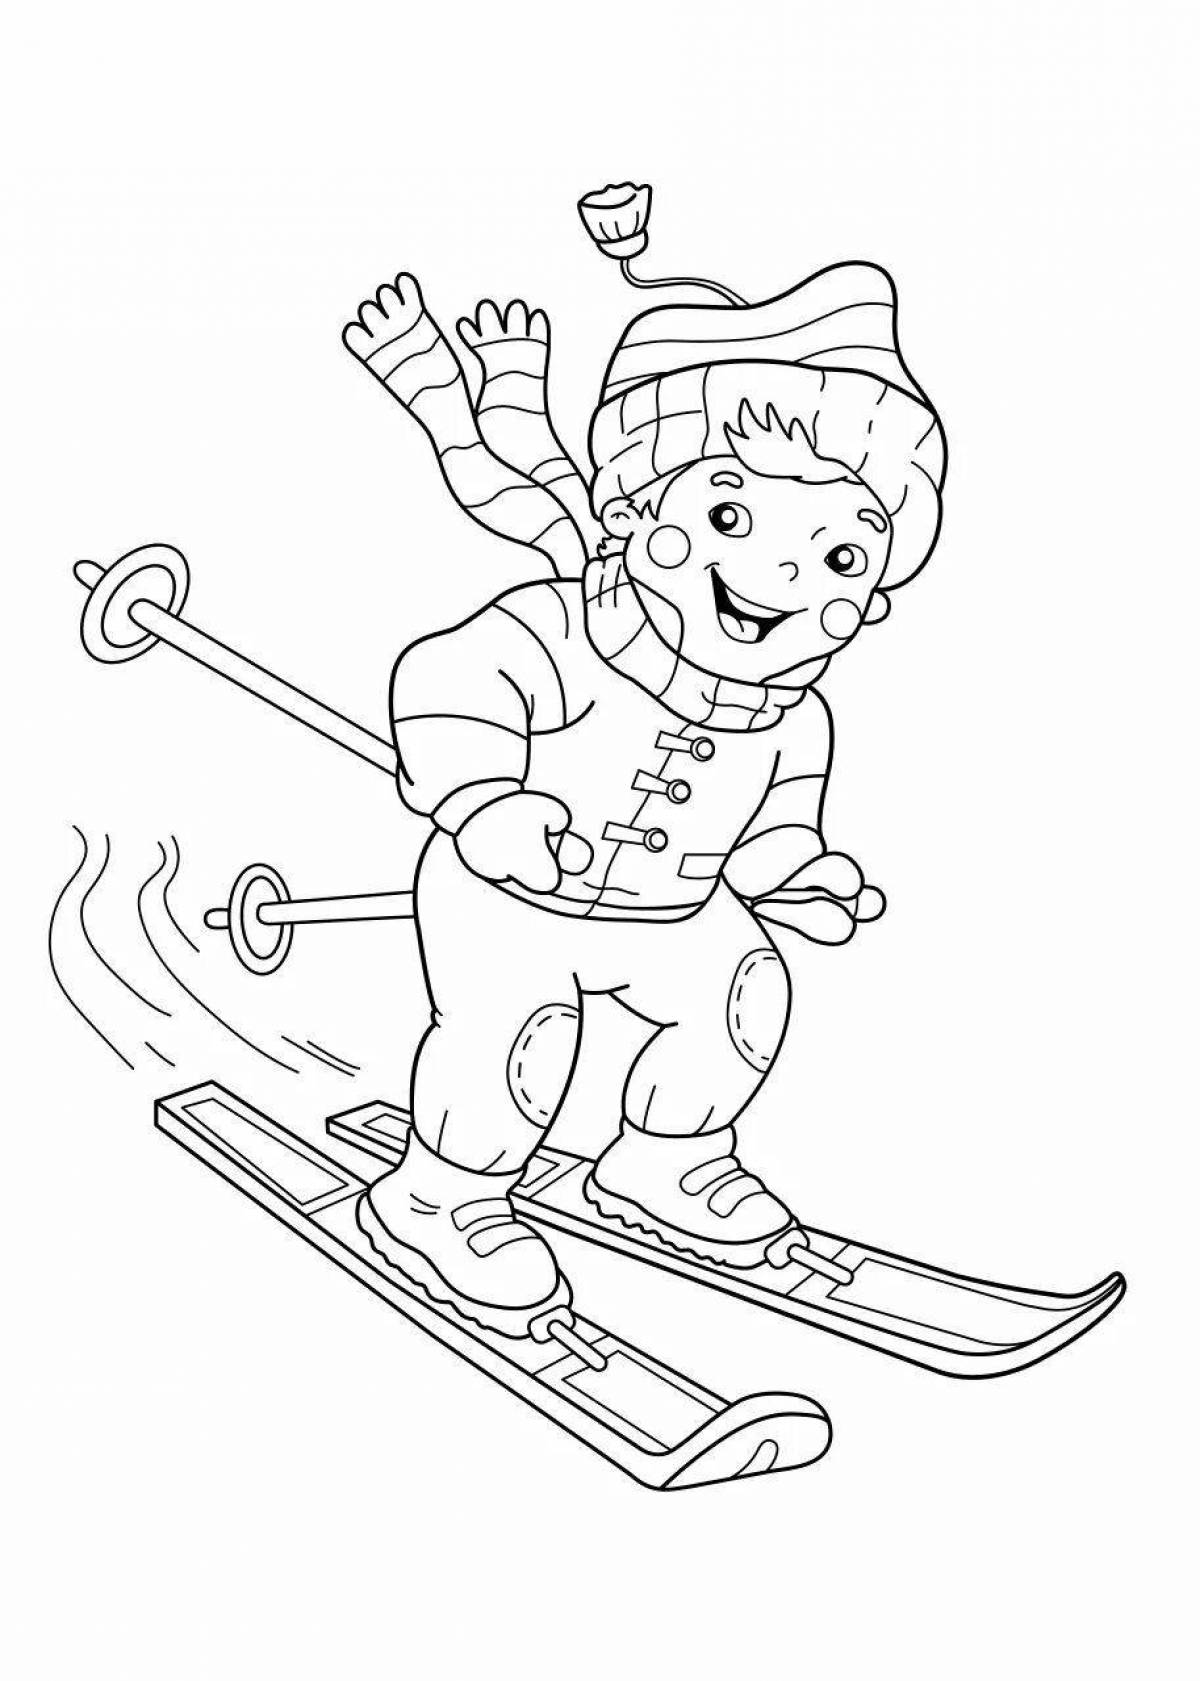 Fascinating winter sports coloring book for children 6-7 years old